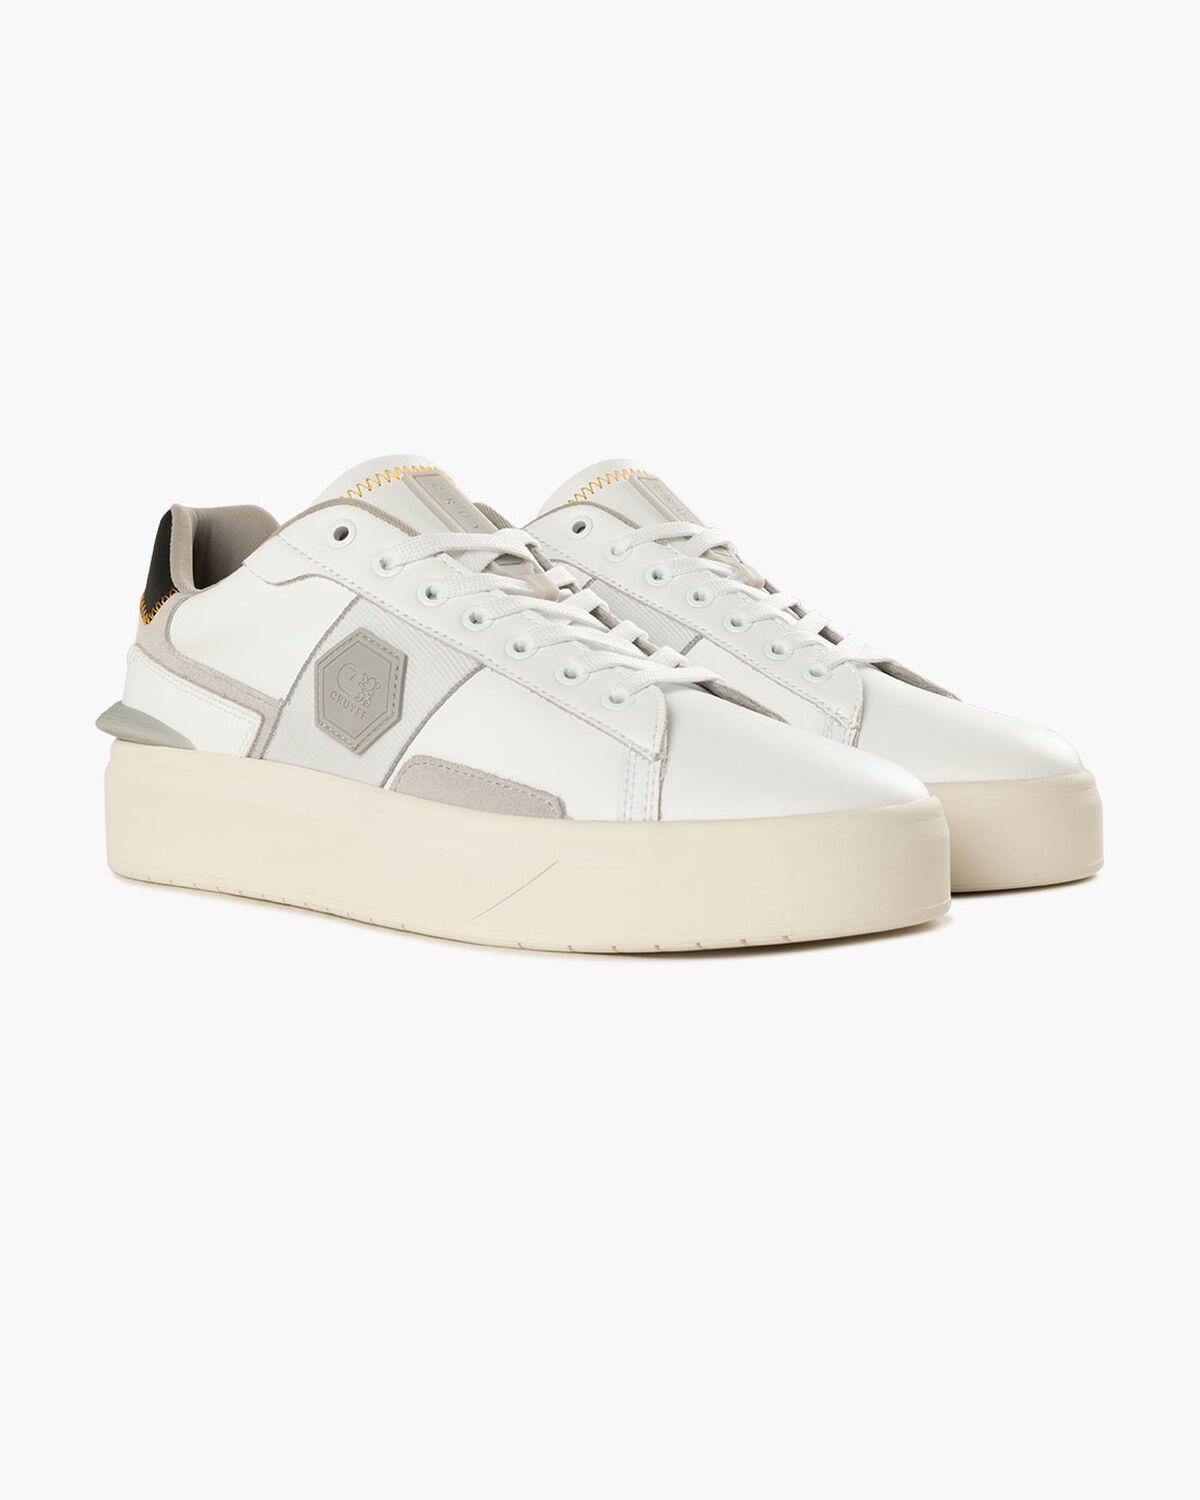 Charco - Soft Leather/Suede, White, hi-res